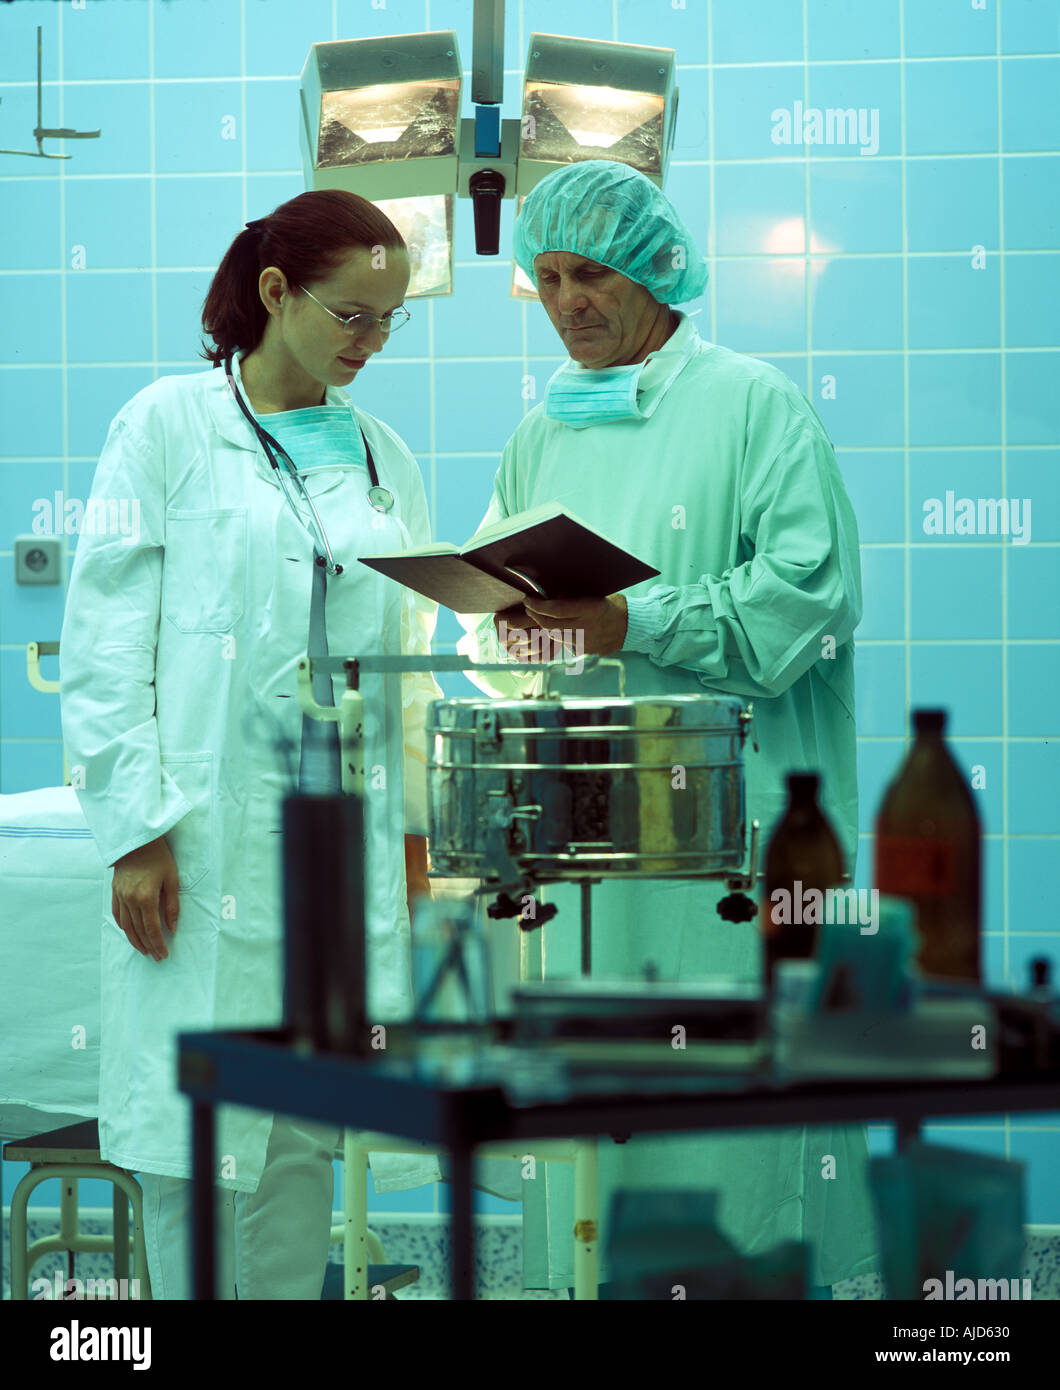 Two Doctors Looking at A Book Stock Photo Alamy